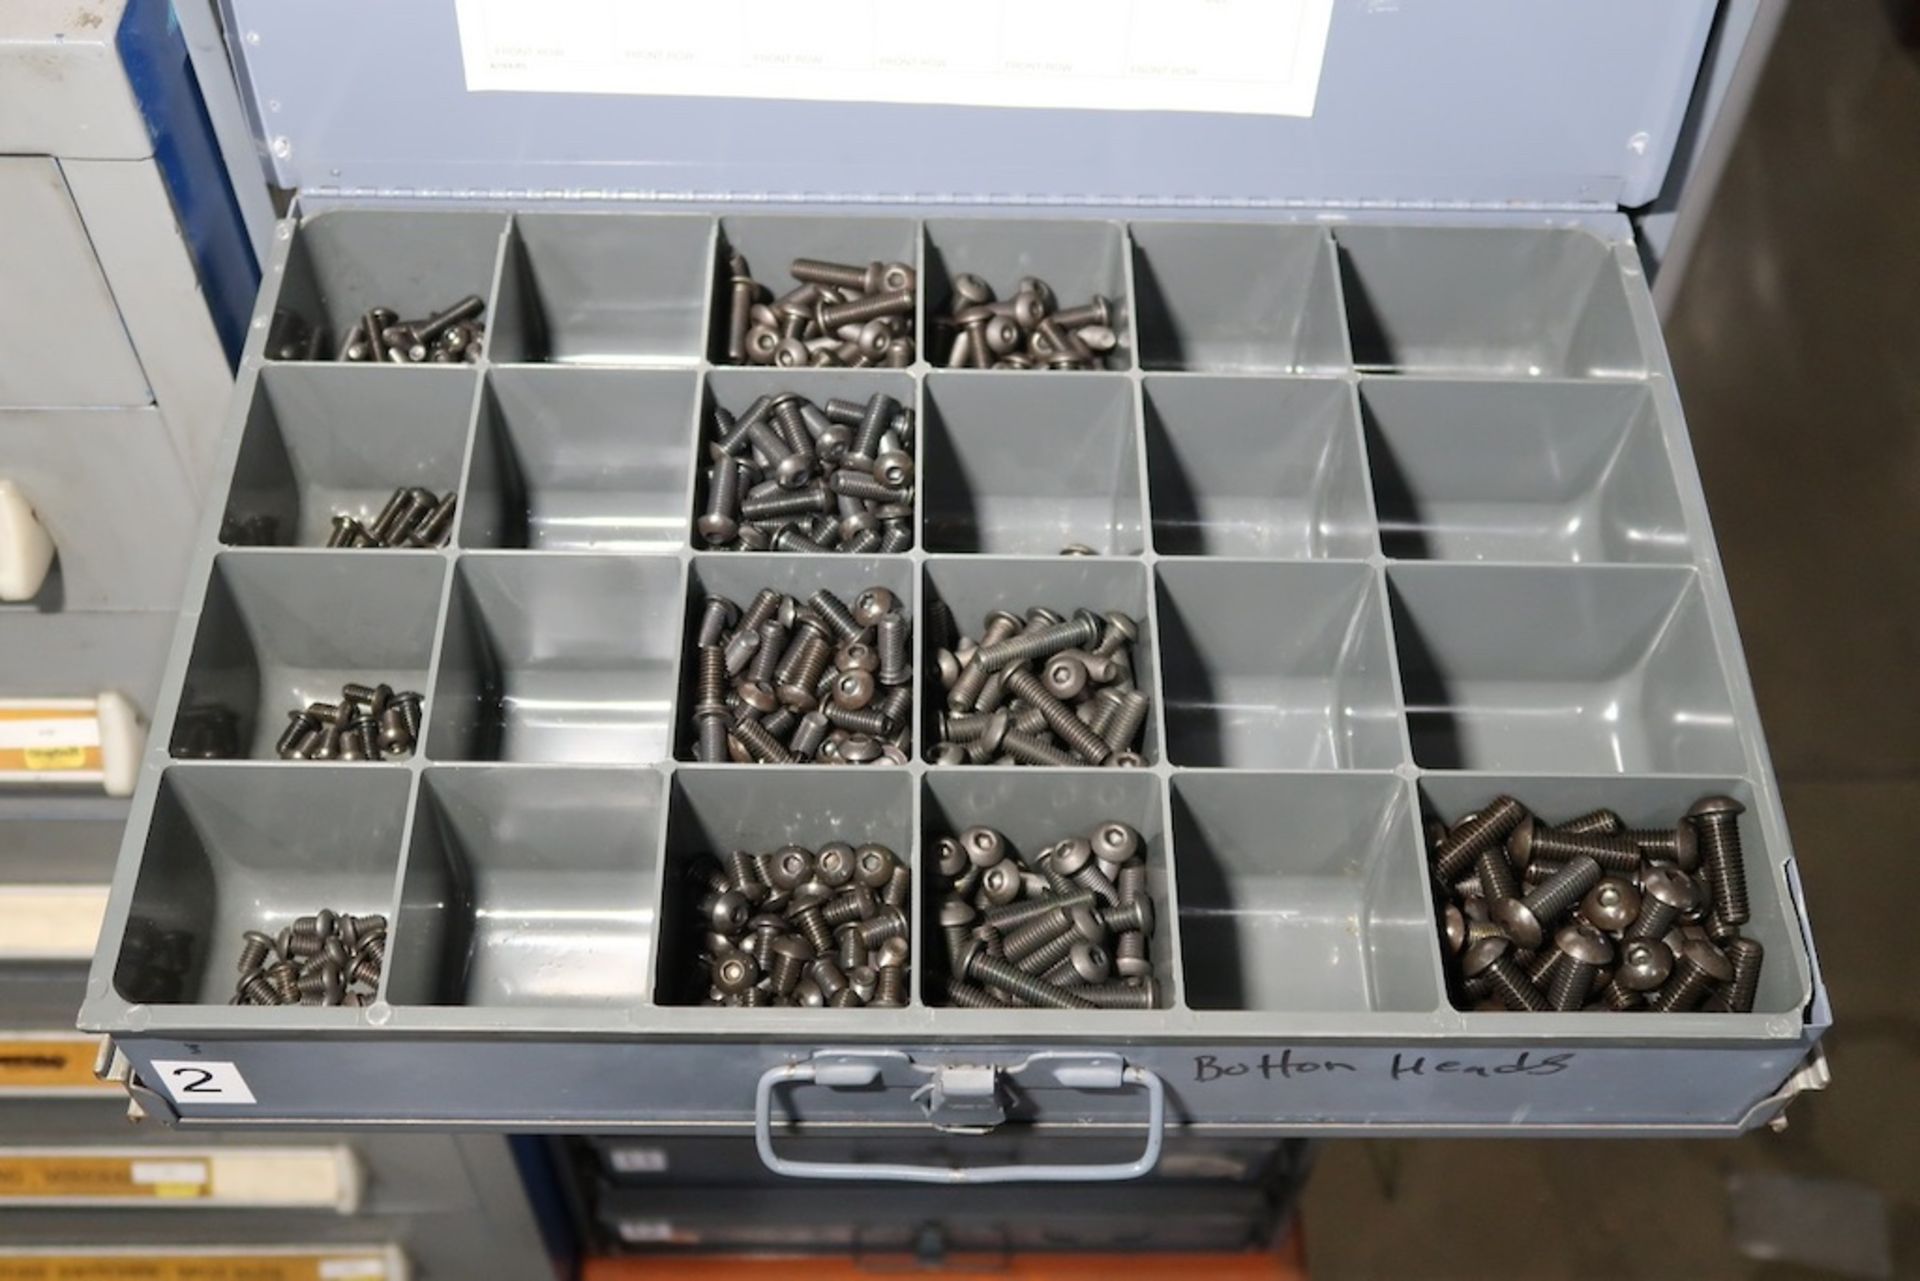 12-Drawer Parts Organizer with Misc. Hardware, Lock Nuts, Bolts, Nuts, Etc. - Image 2 of 2